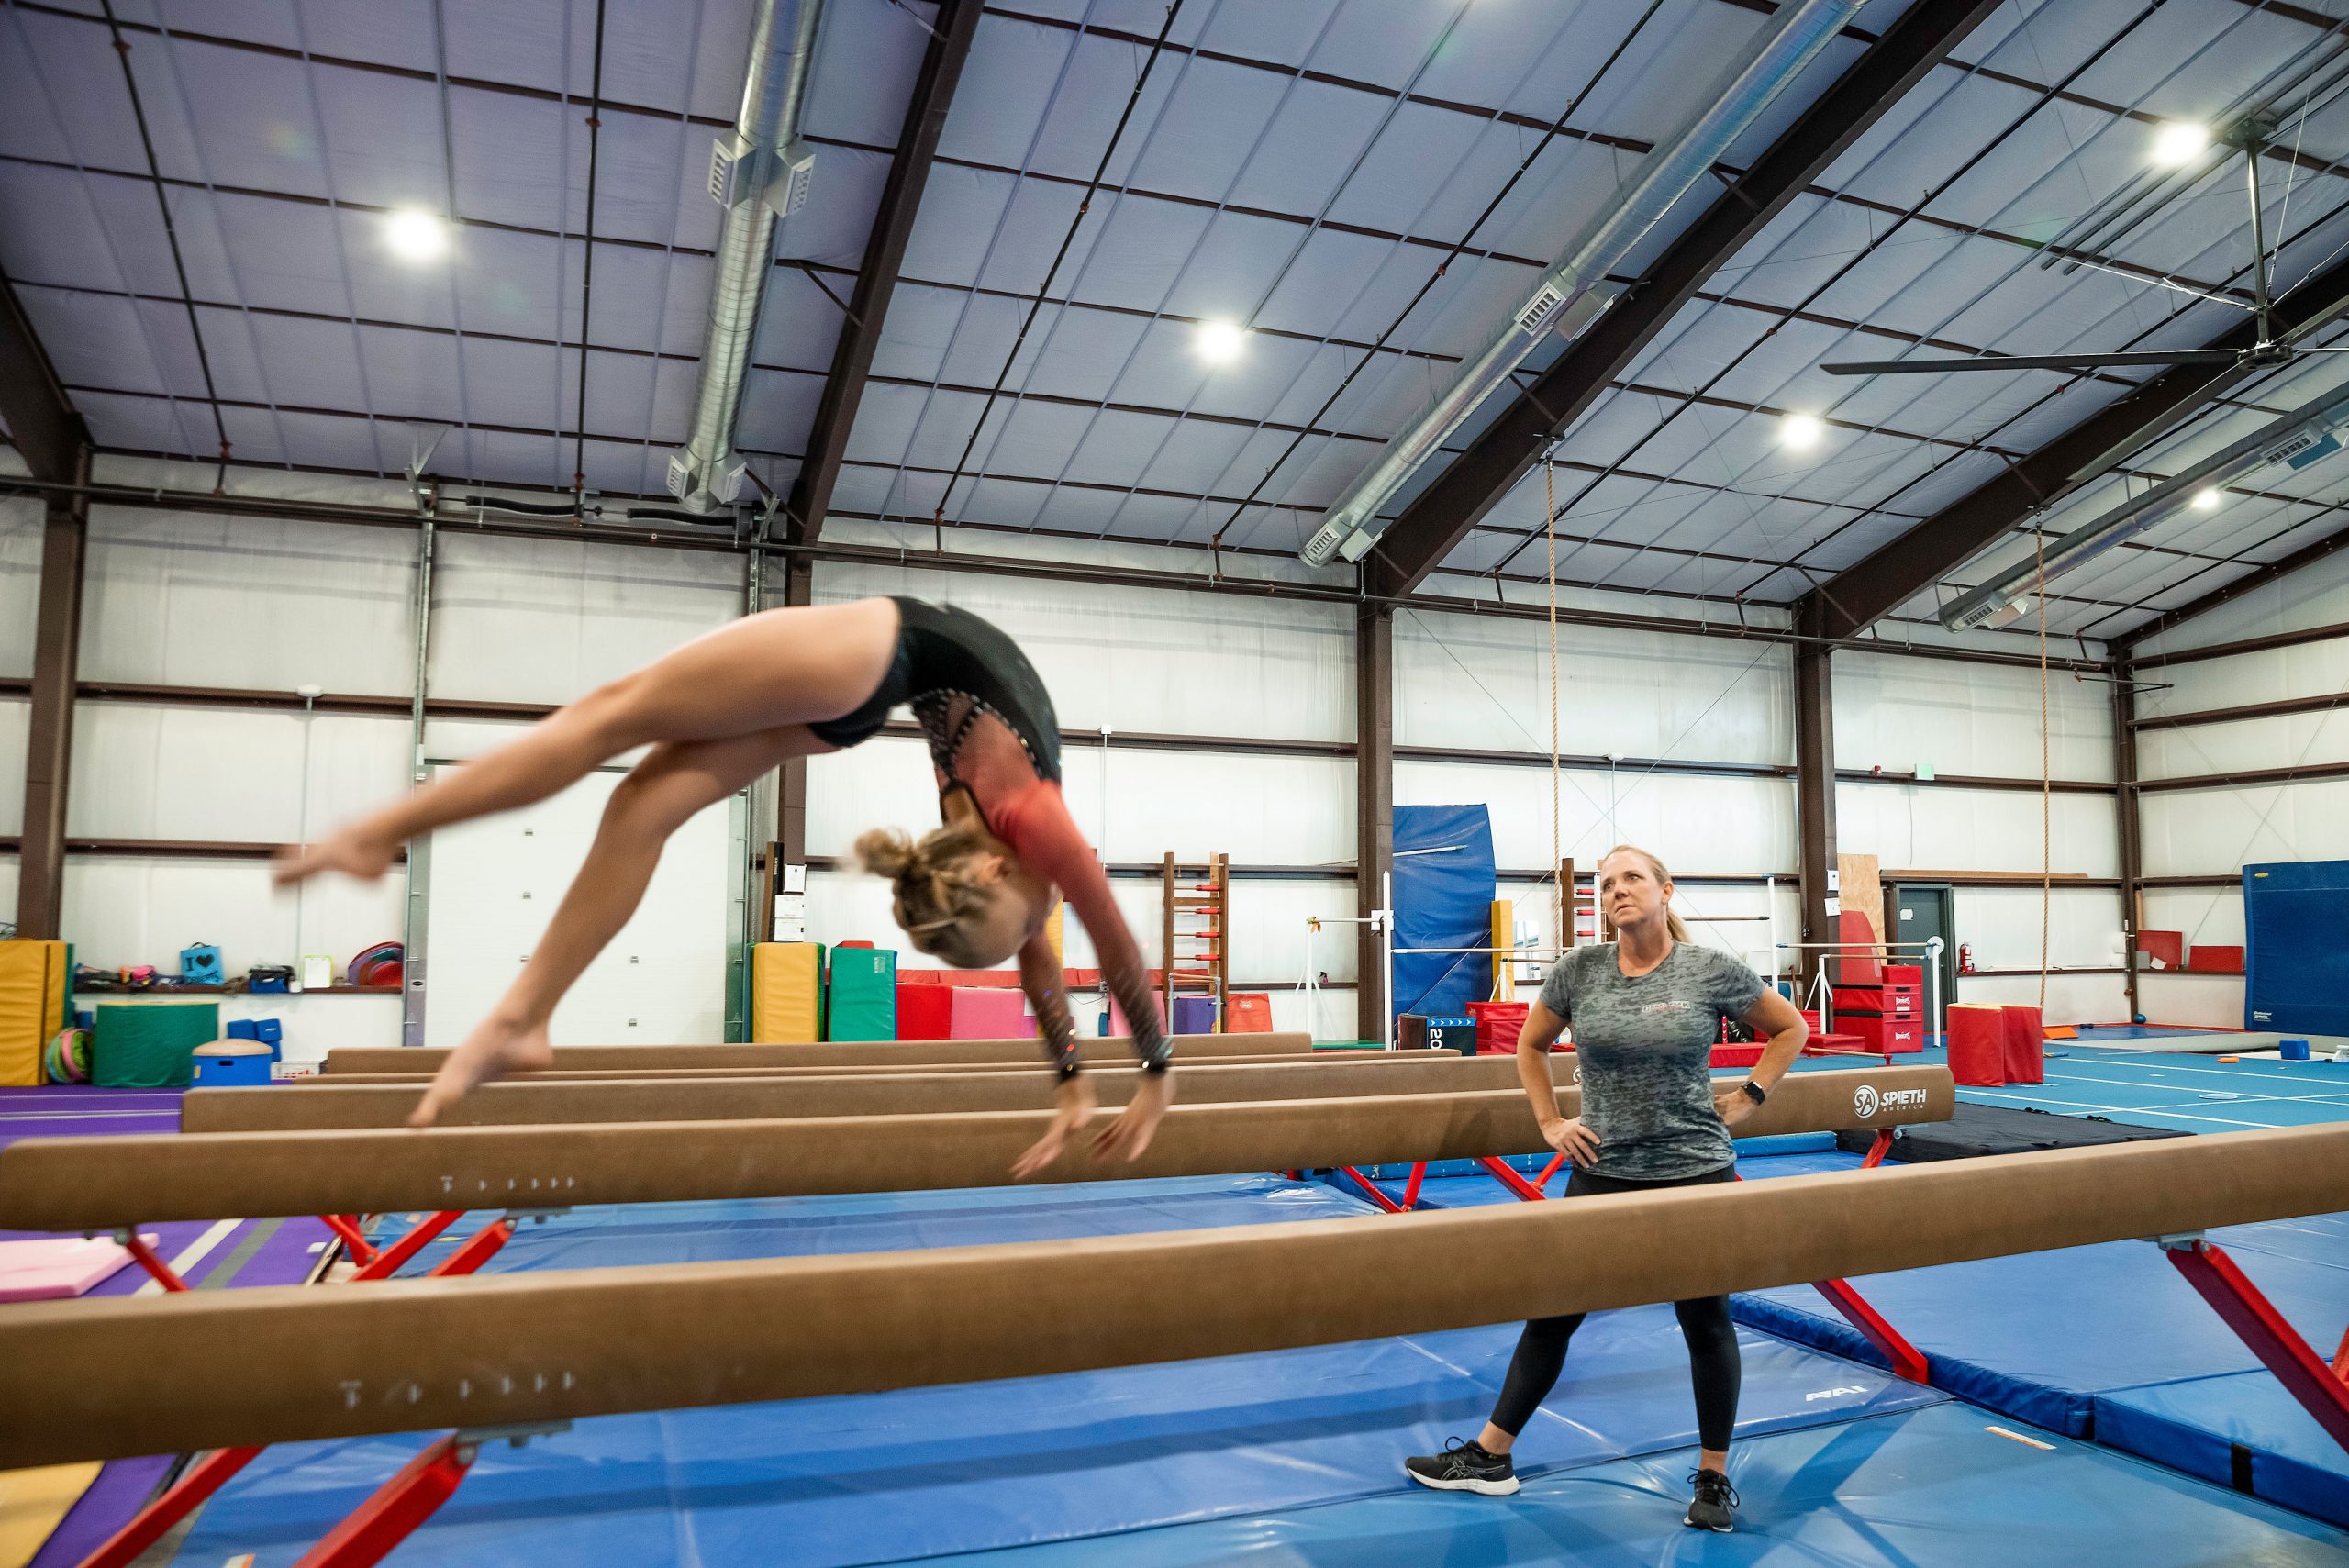 5 Reasons why tumbling classes are great for kids